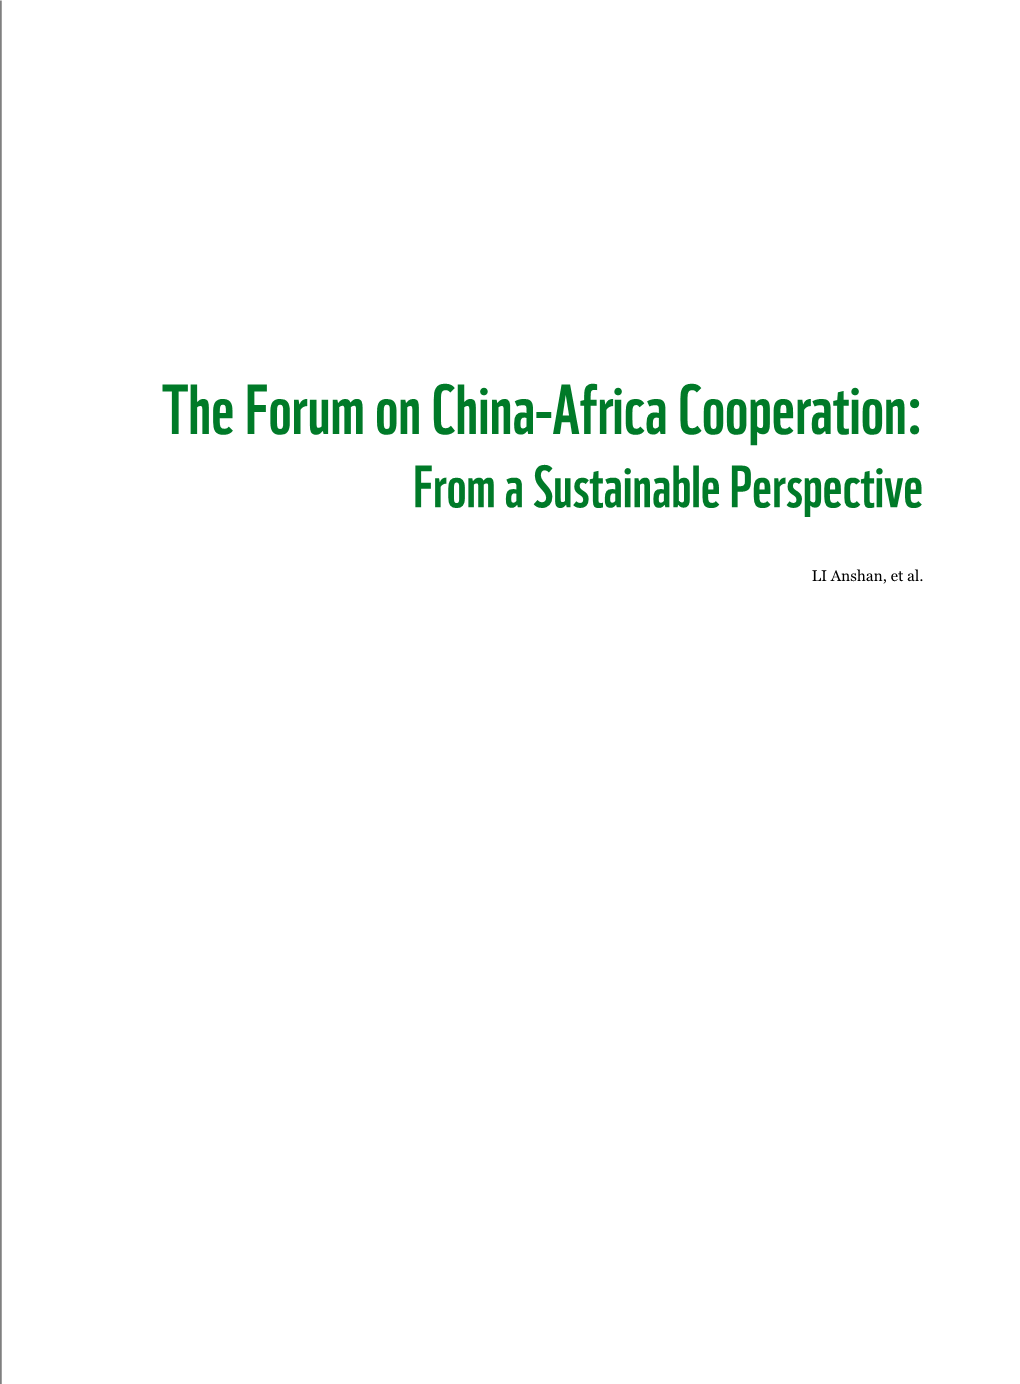 The Forum on China-Africa Cooperation: from a Sustainable Perspective